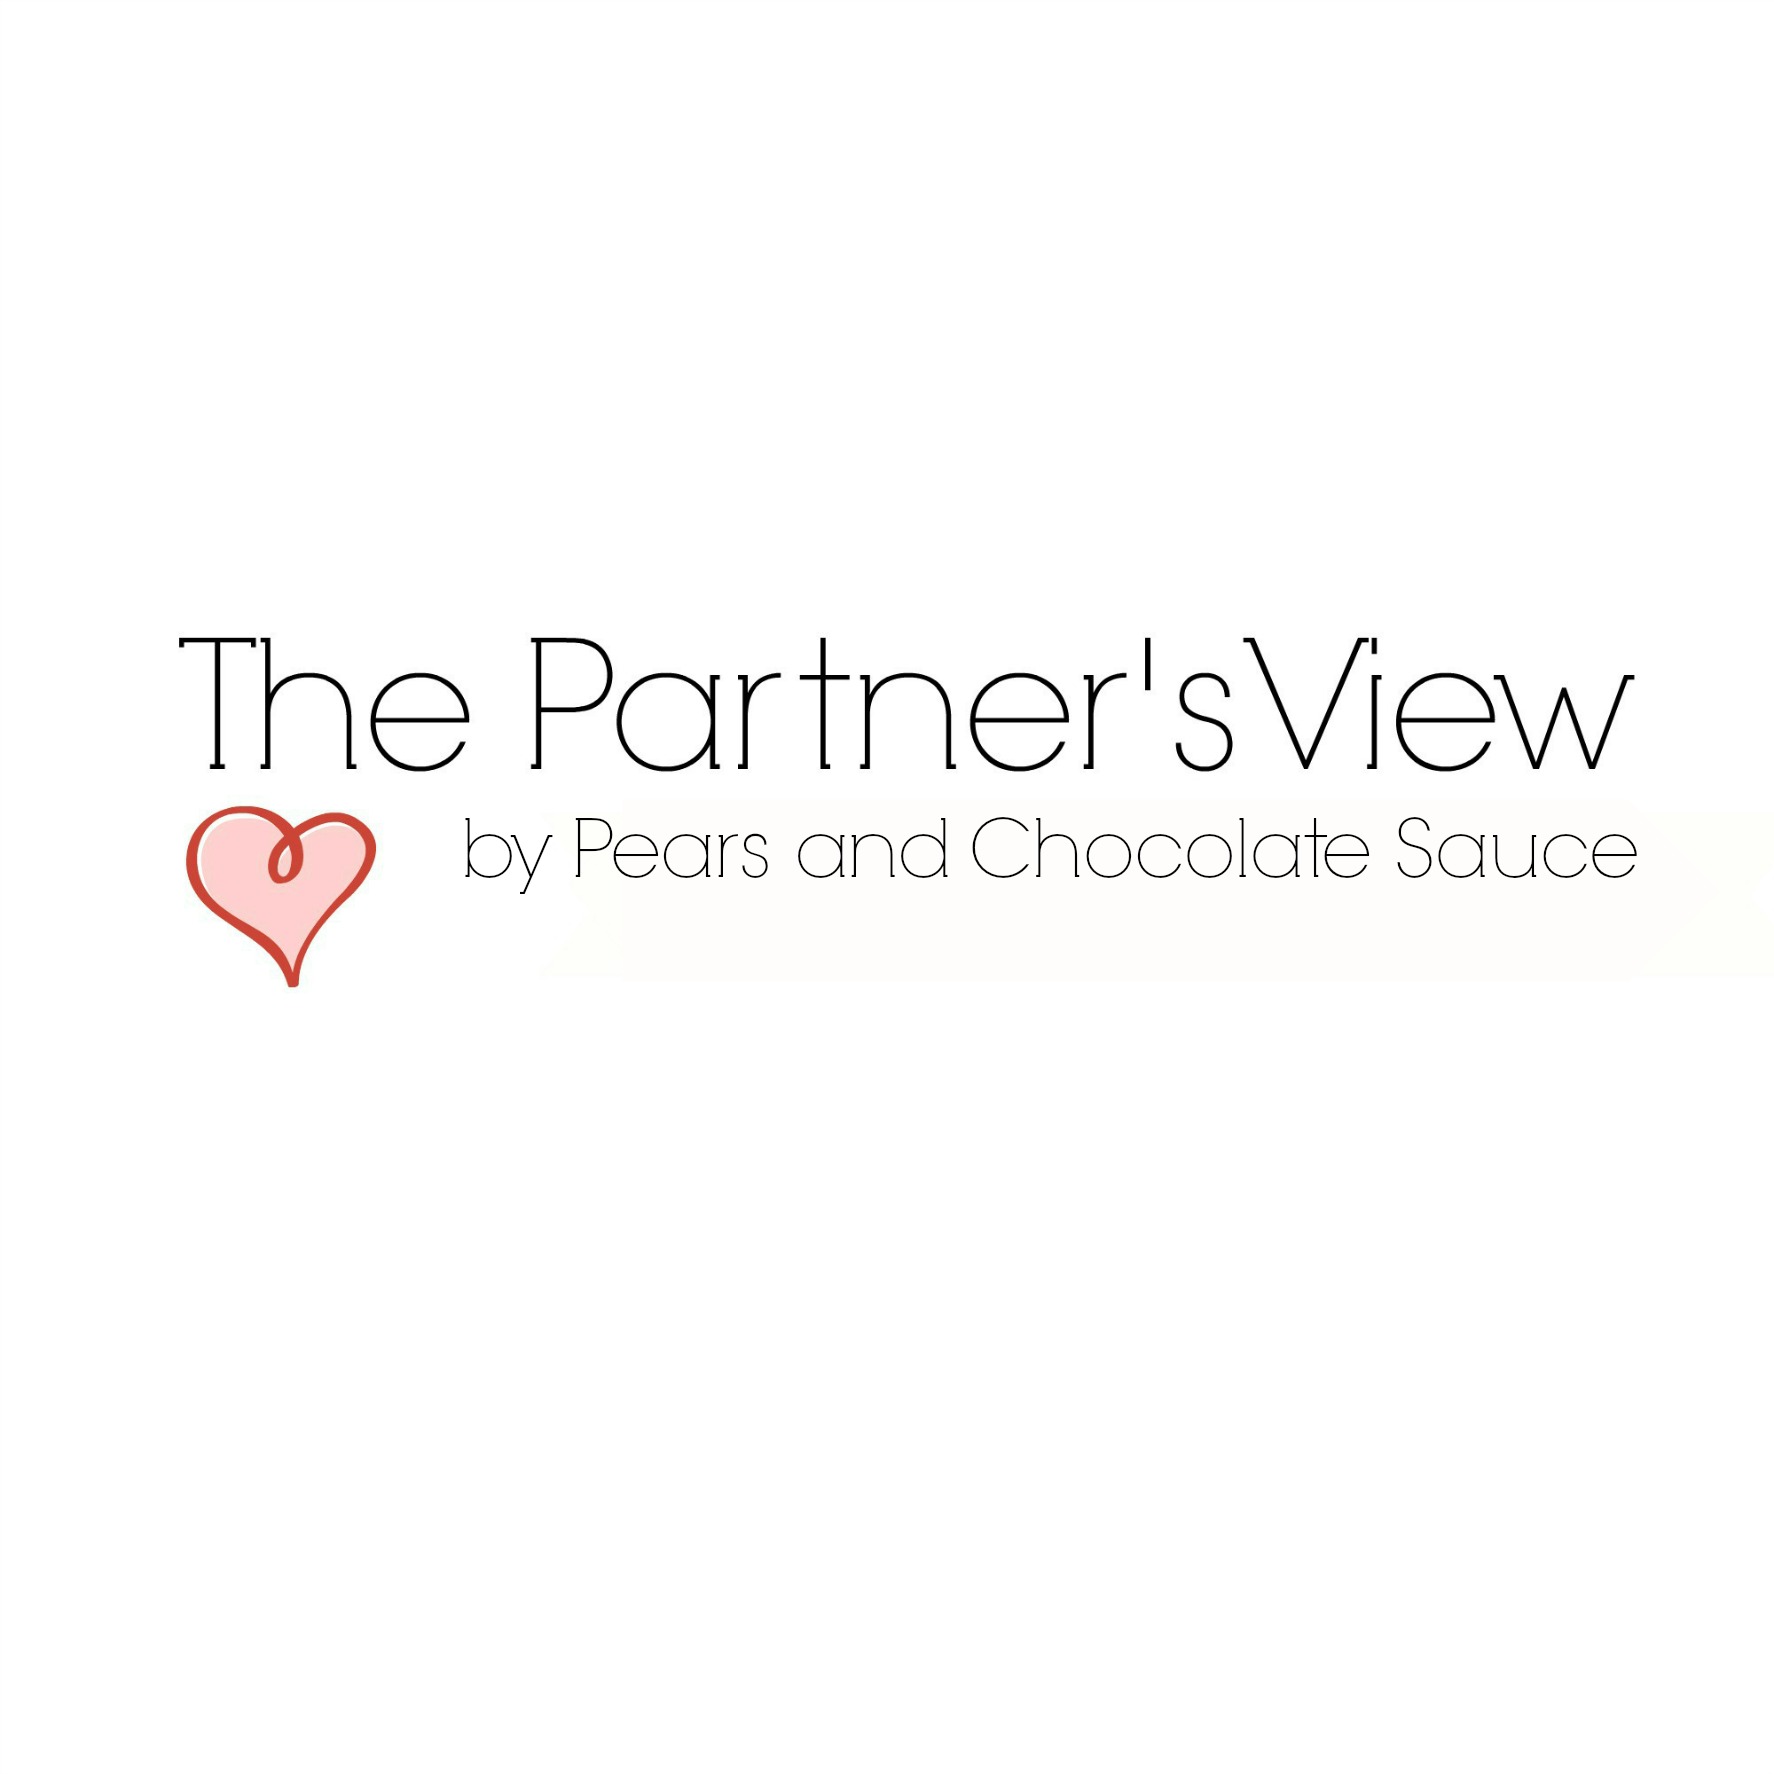 The Partner's View Pears and Chocolate Sauce